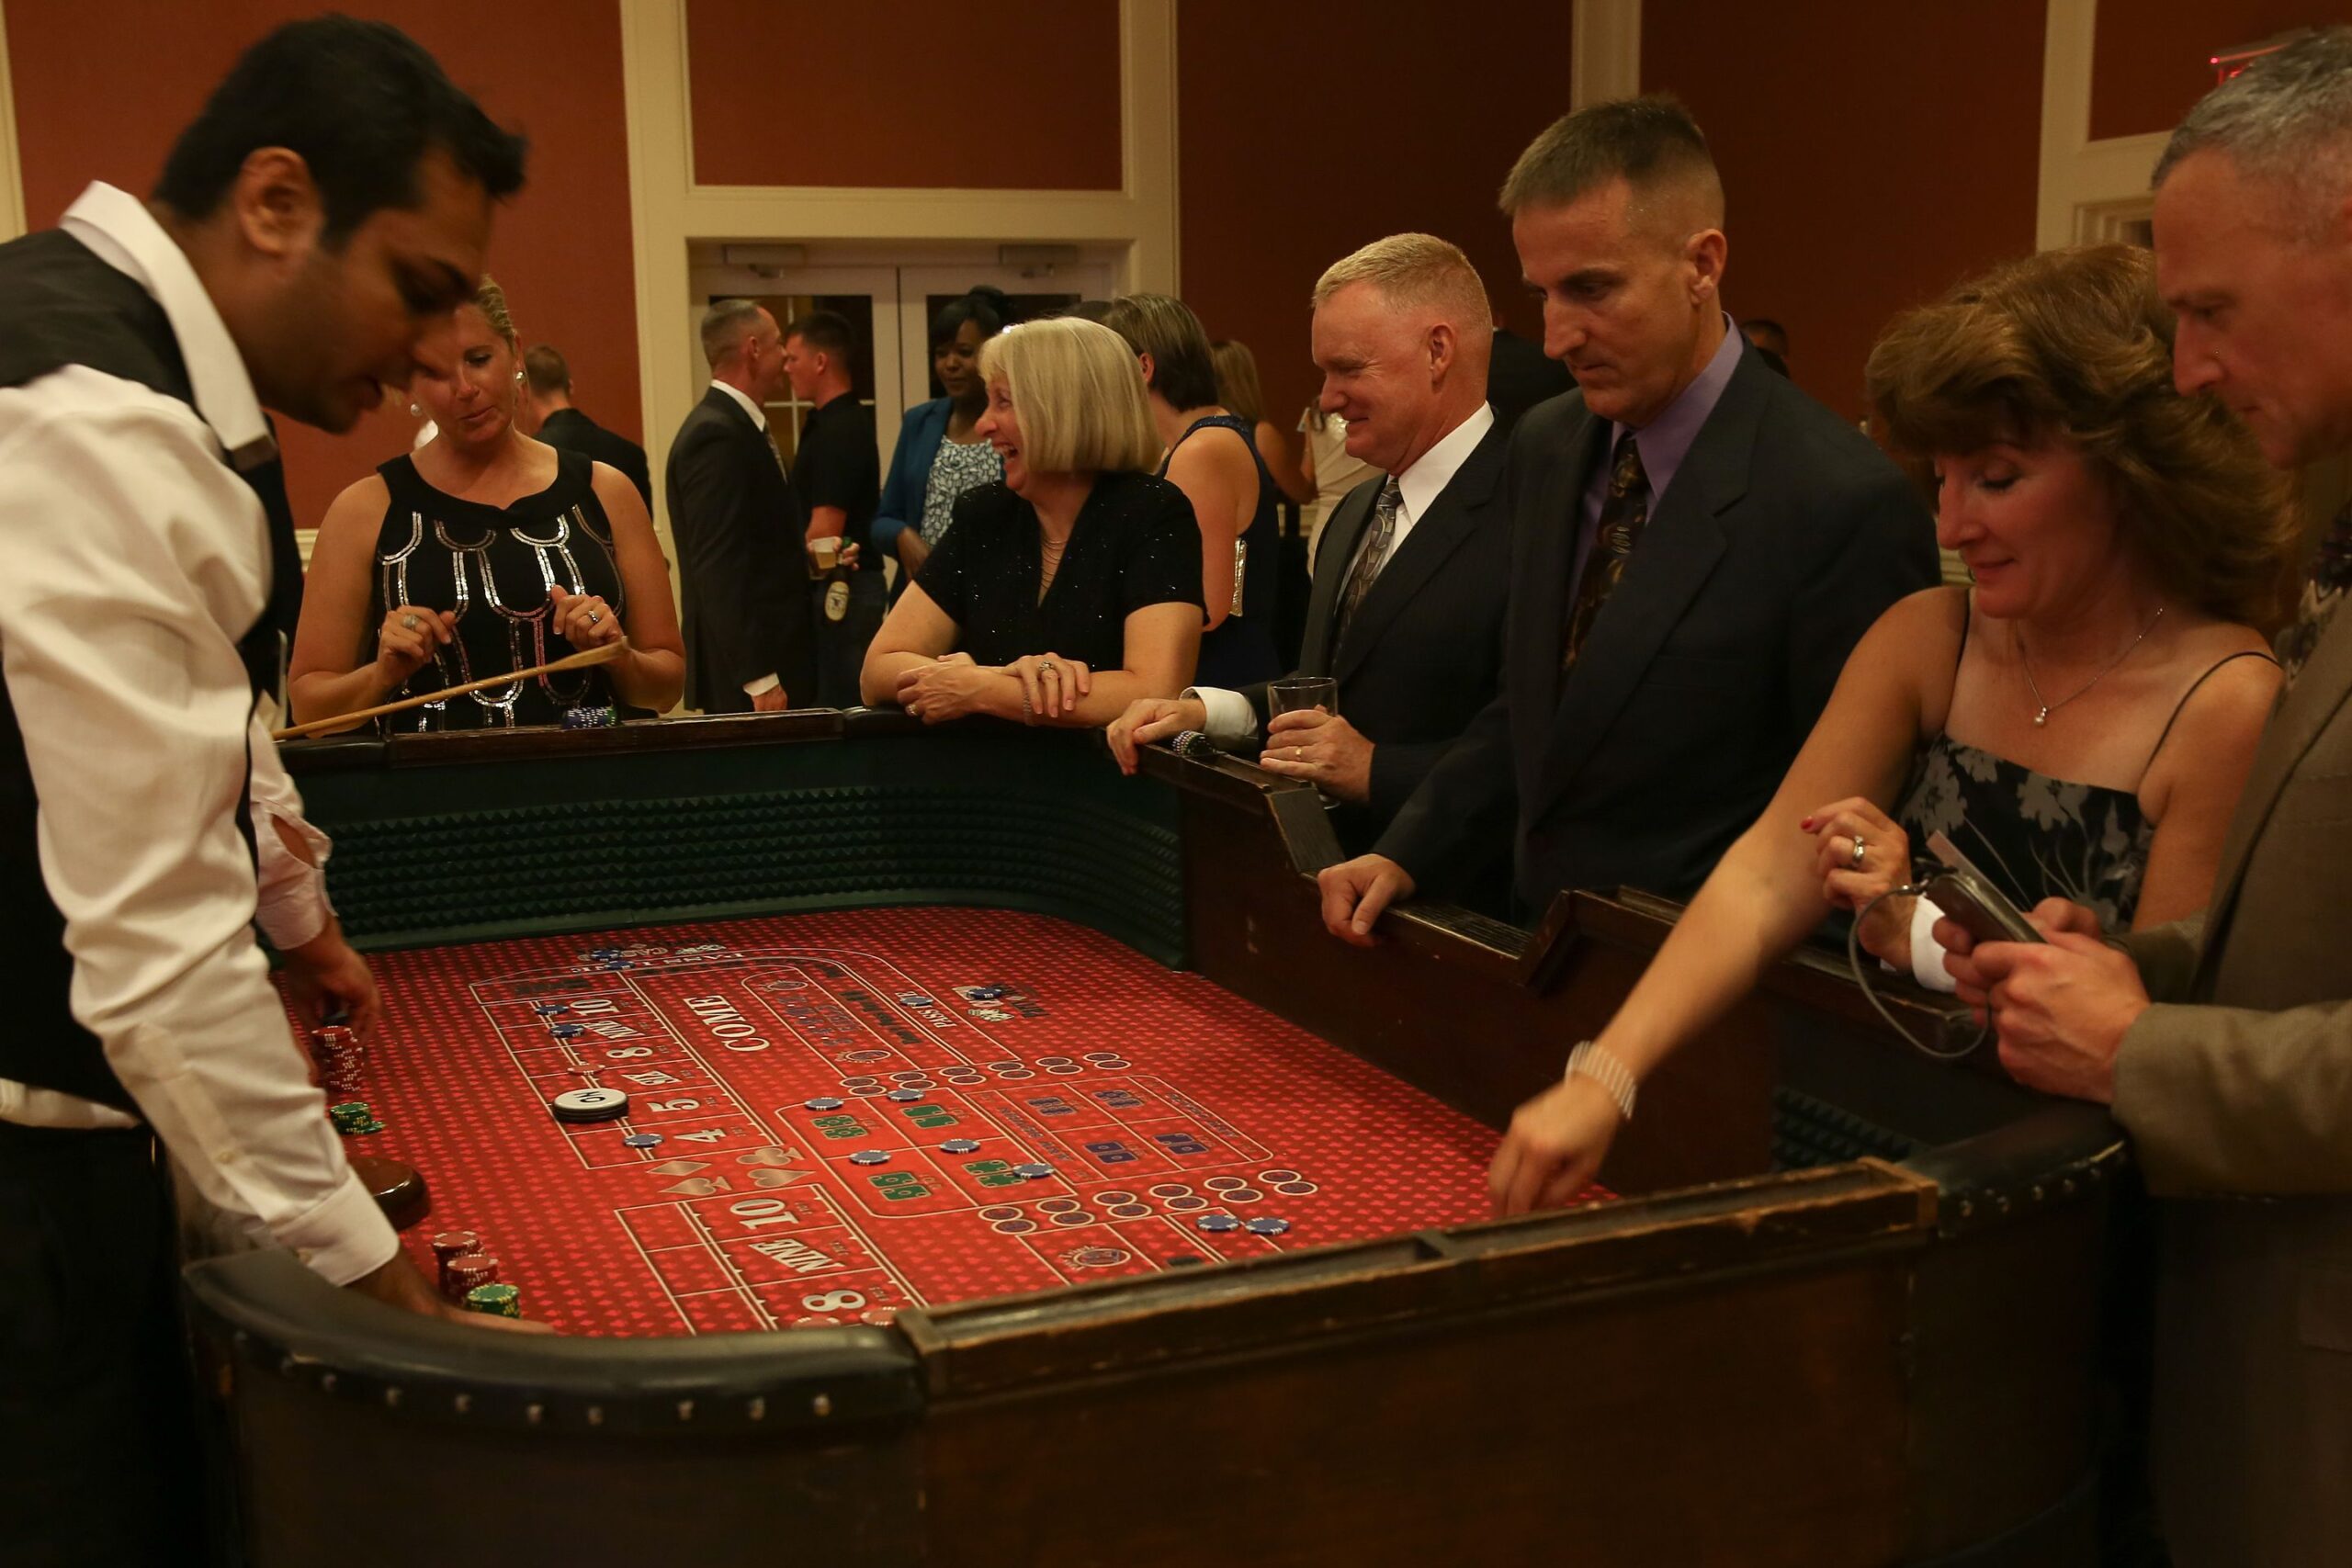 craps table with a game in progress